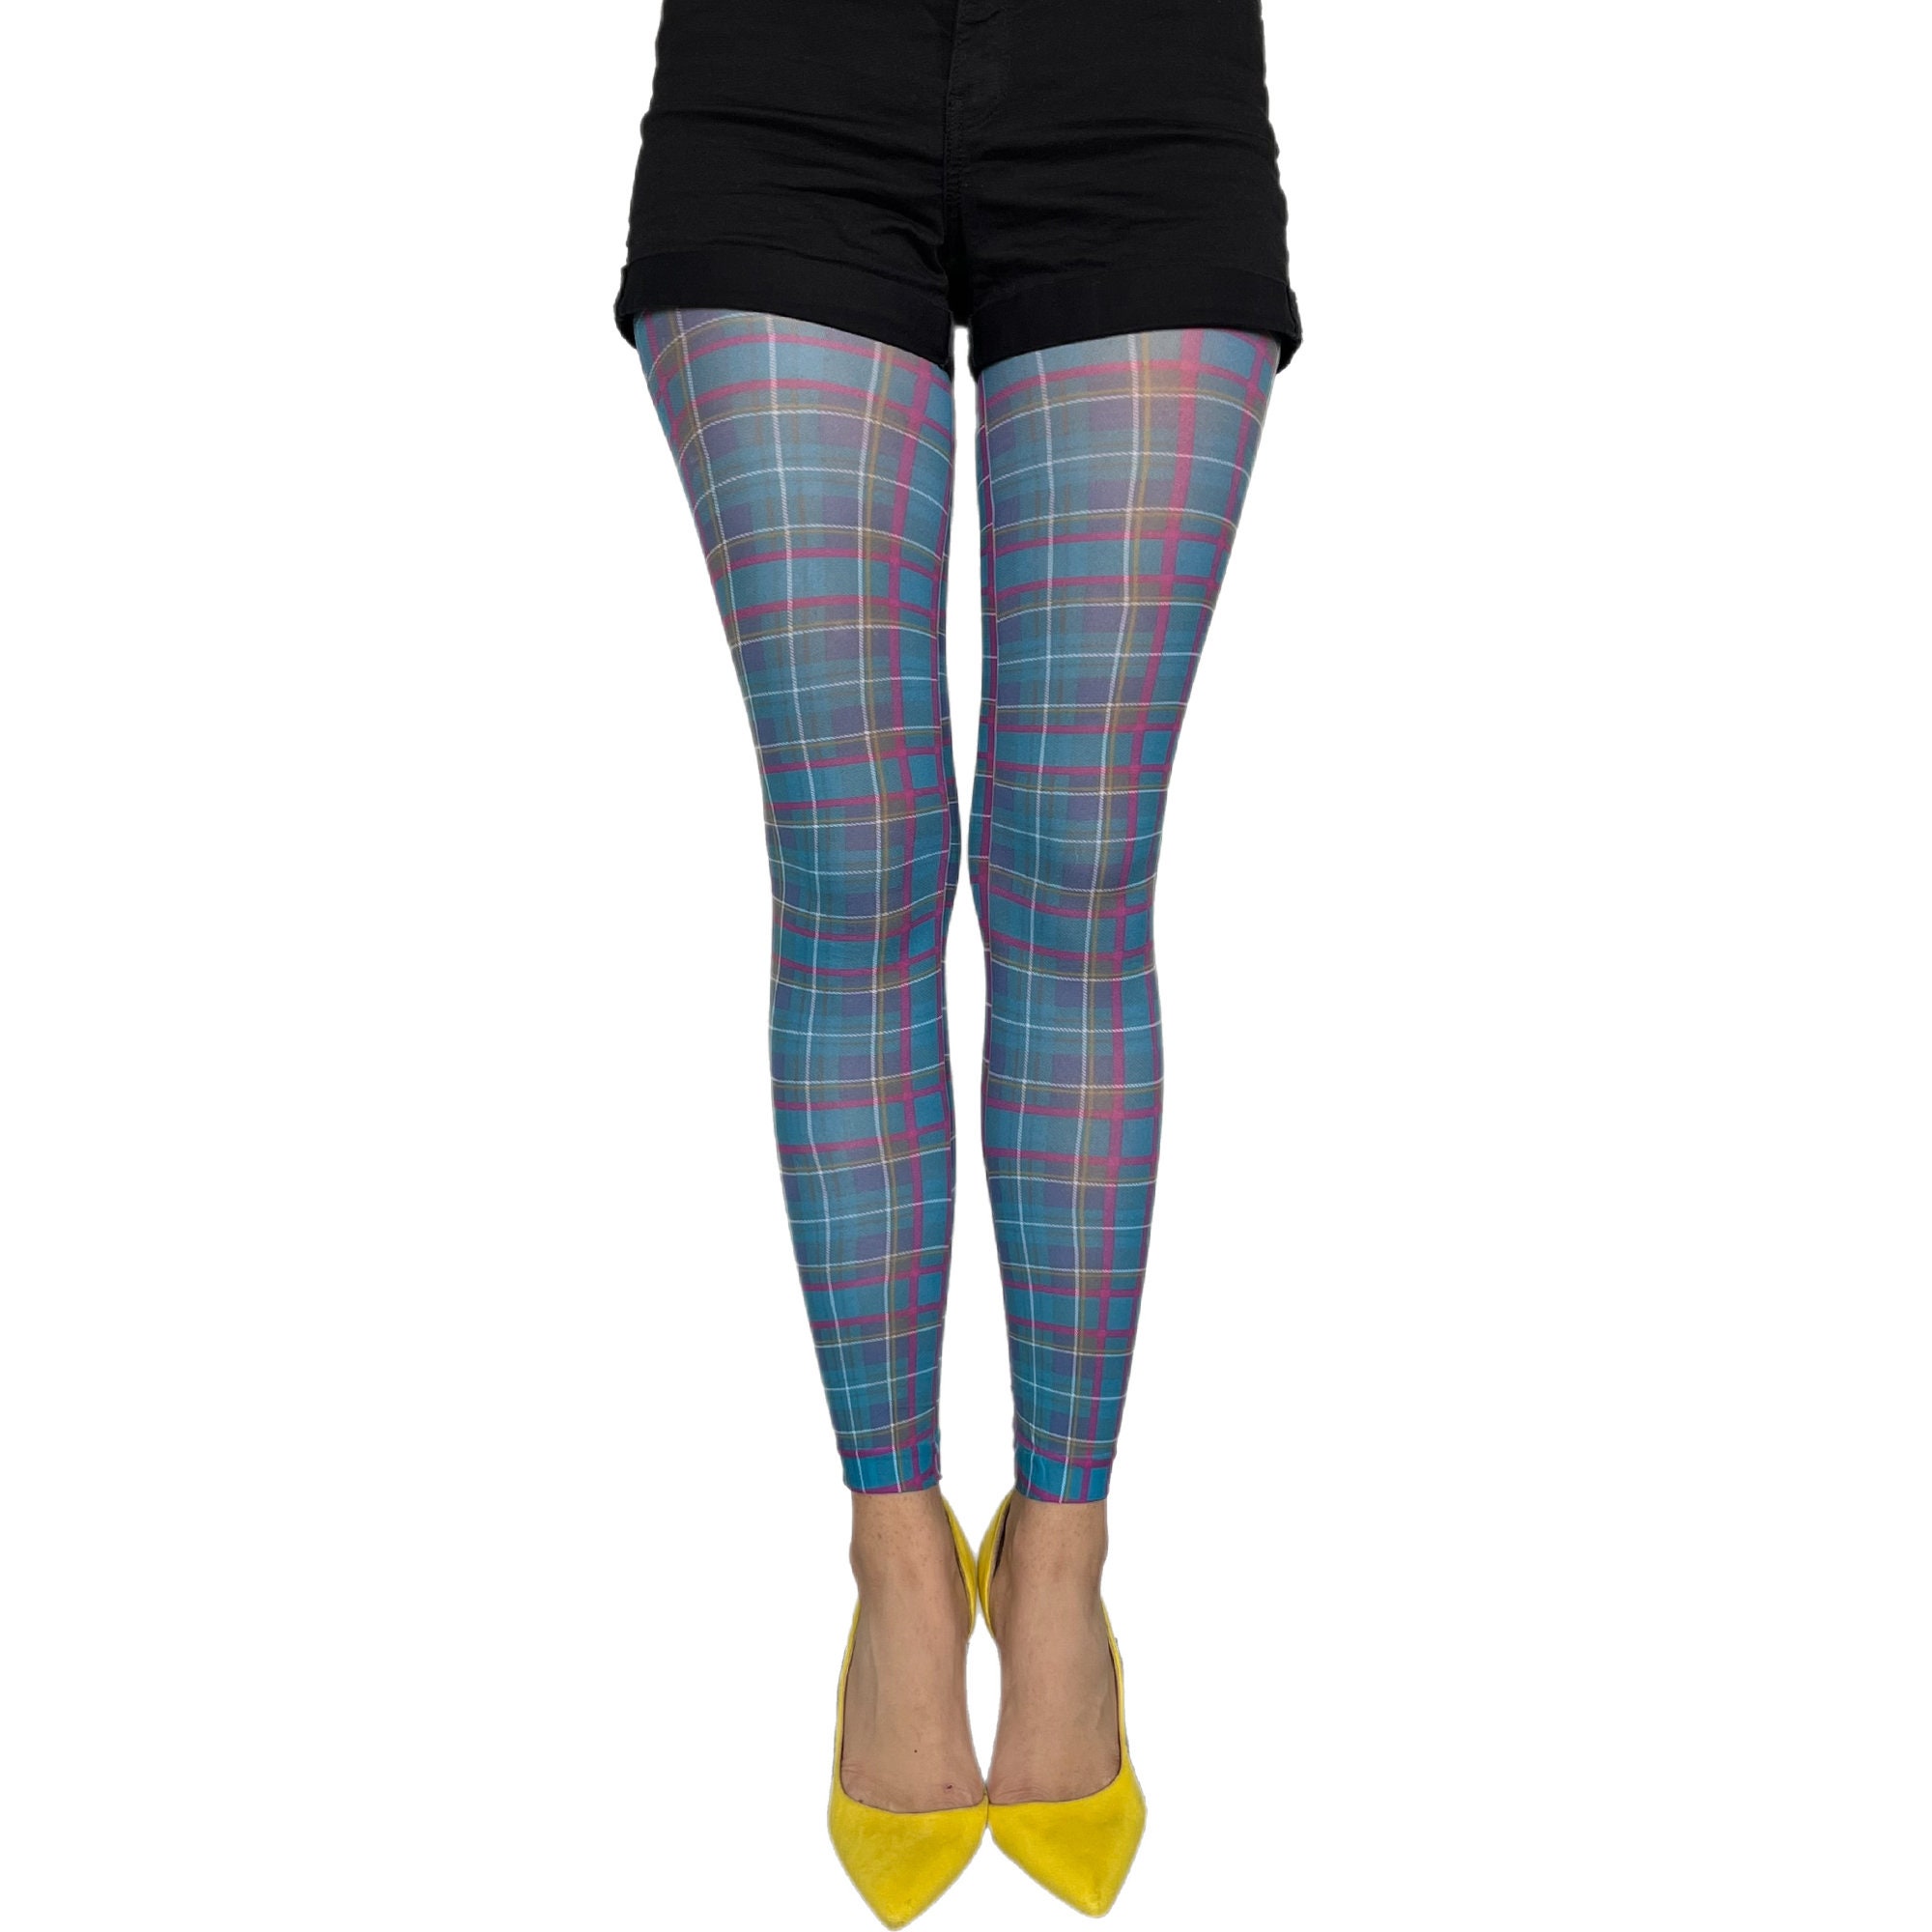 Teal Plaid Patterned Tights for Women -  Canada